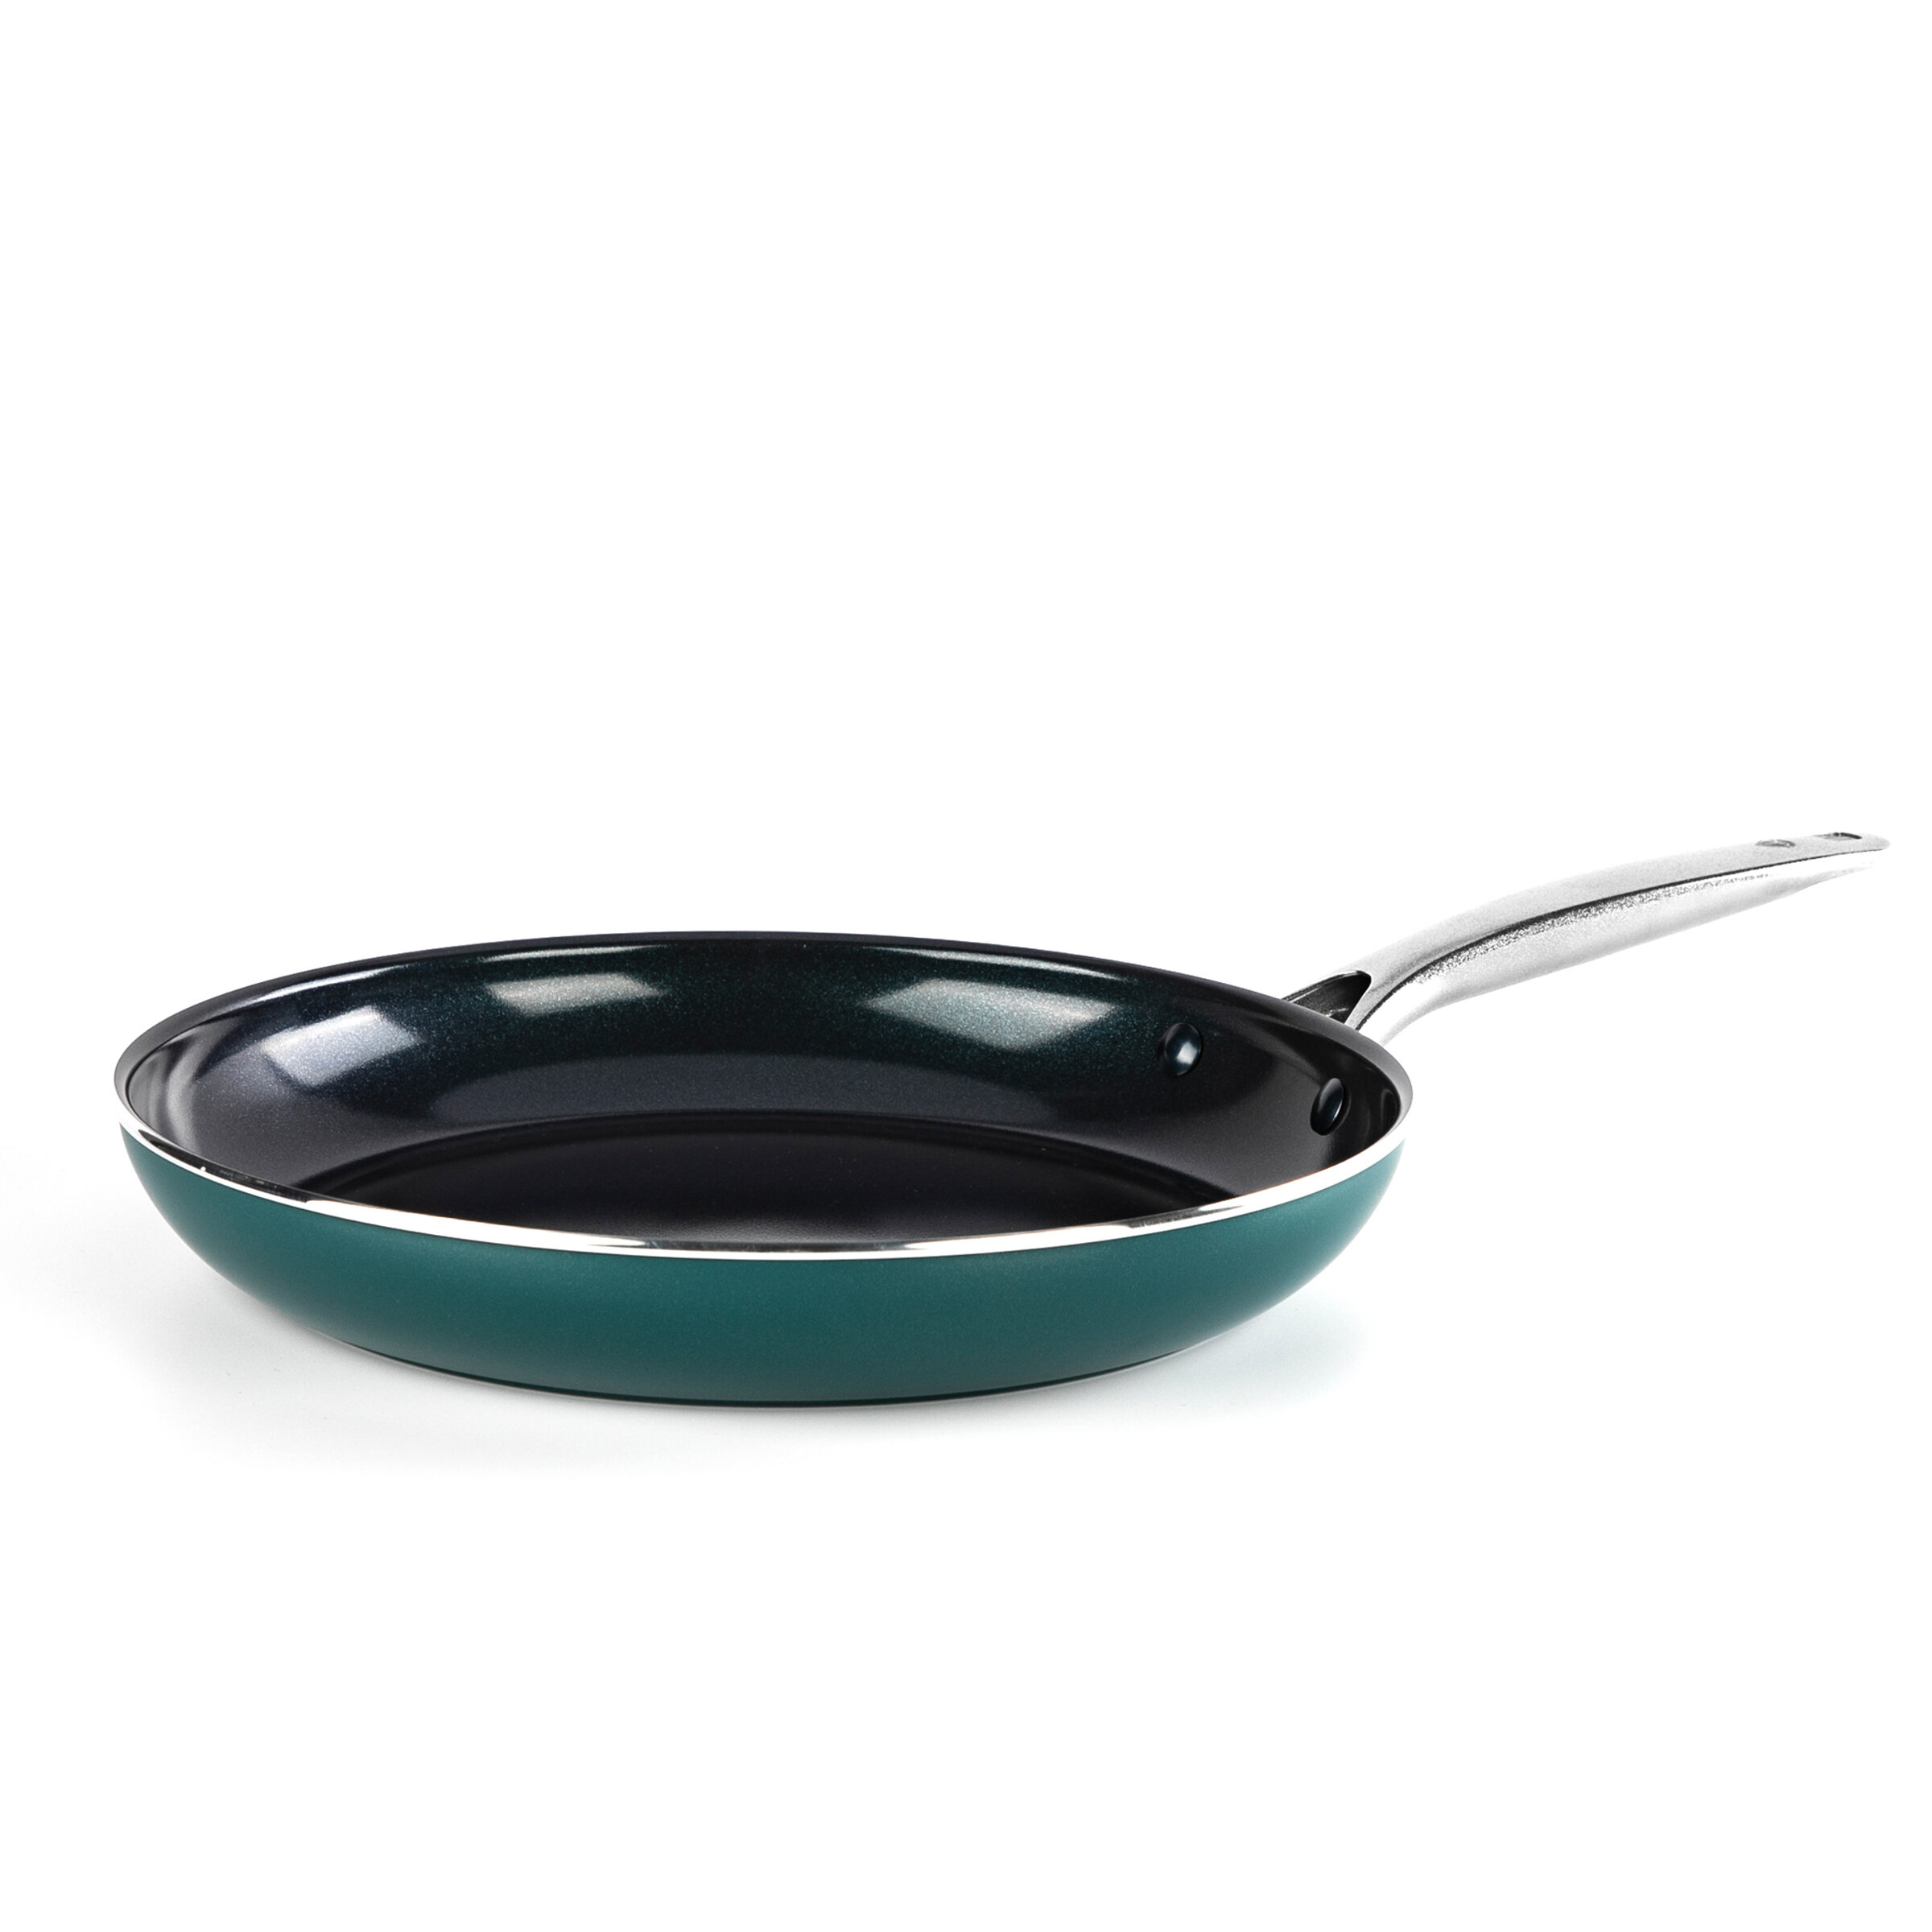 Blue Diamond's Nonstick Skillet Is Just $40 at